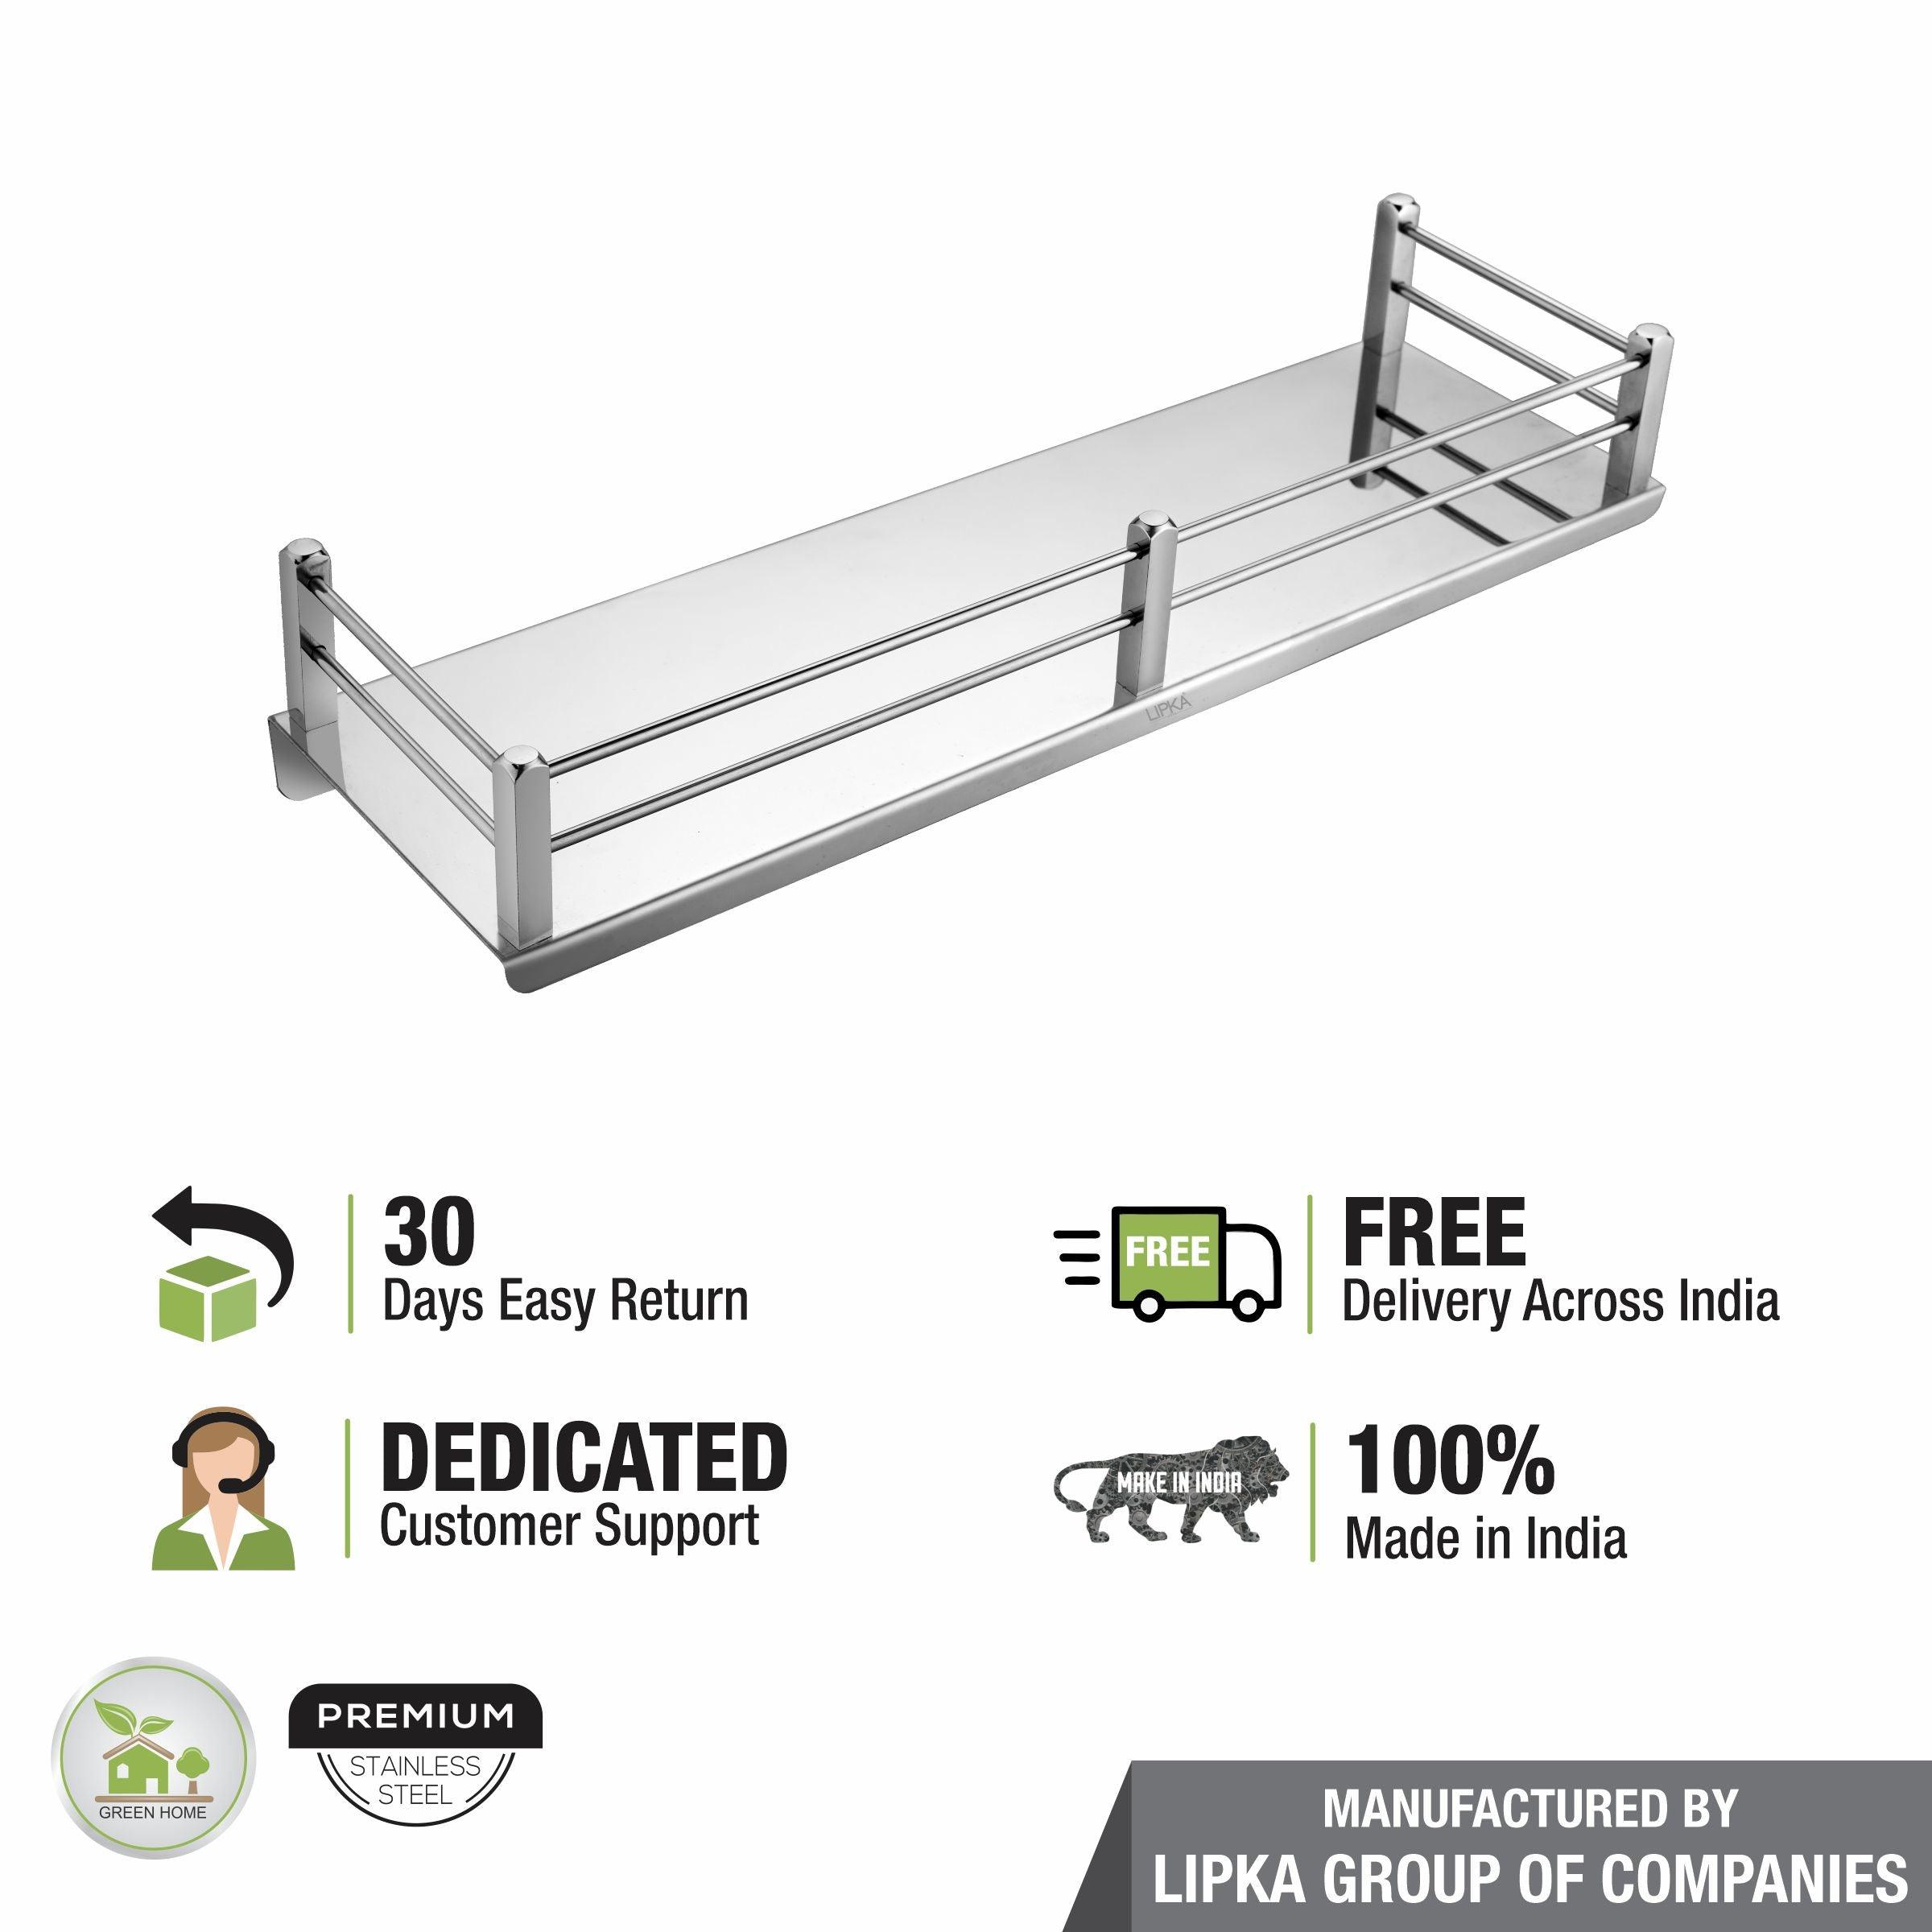 Classic Wall Shelf Tray (5 x 15 Inches) free delivery